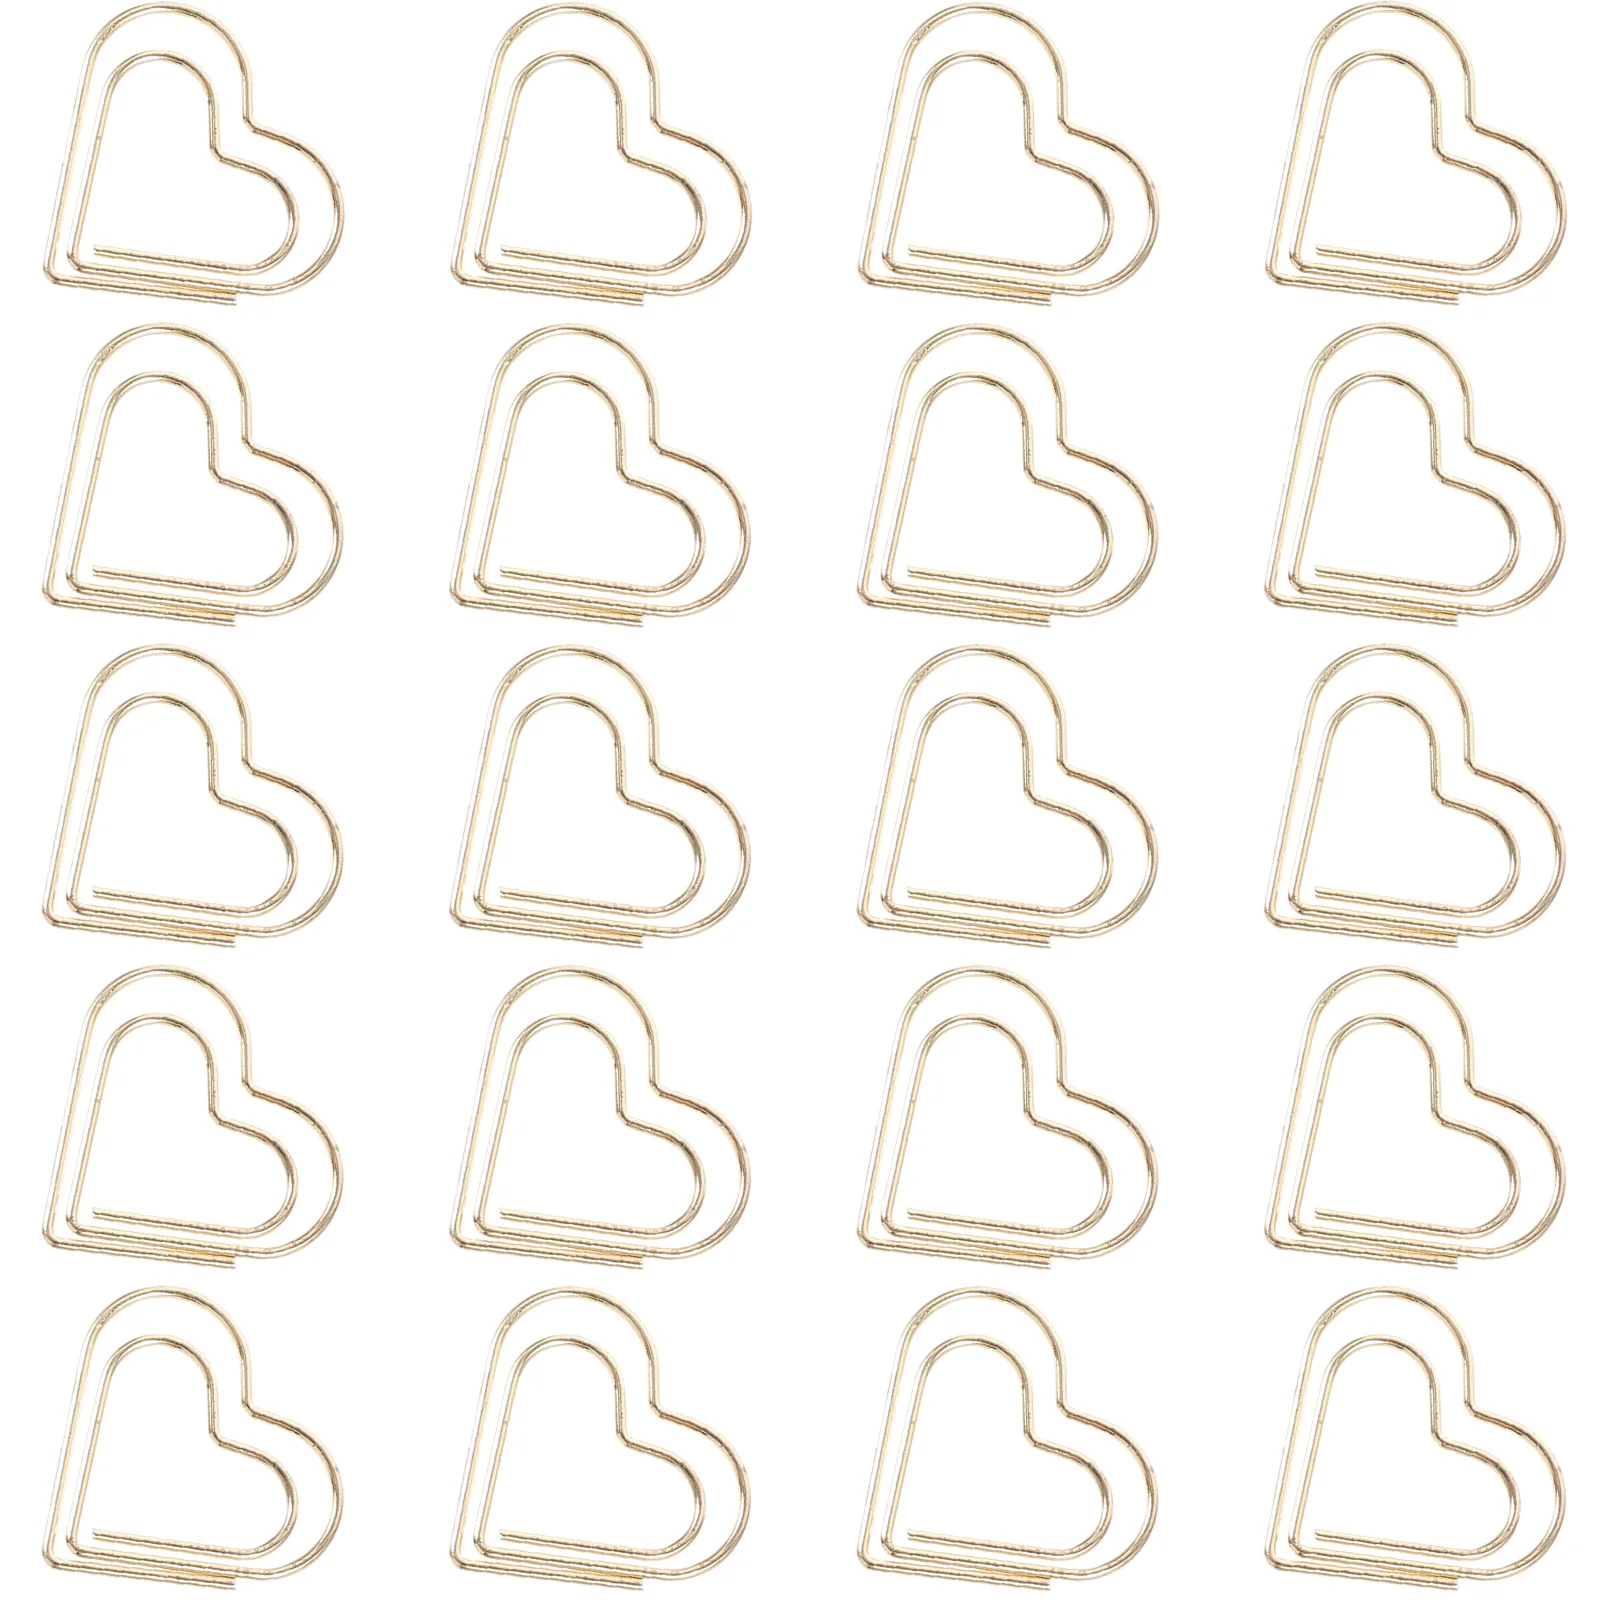 

50 Pcs The Gift Paper Clips File Heart Paperclips Peach Office Document Delicate Metal Cute Decorative